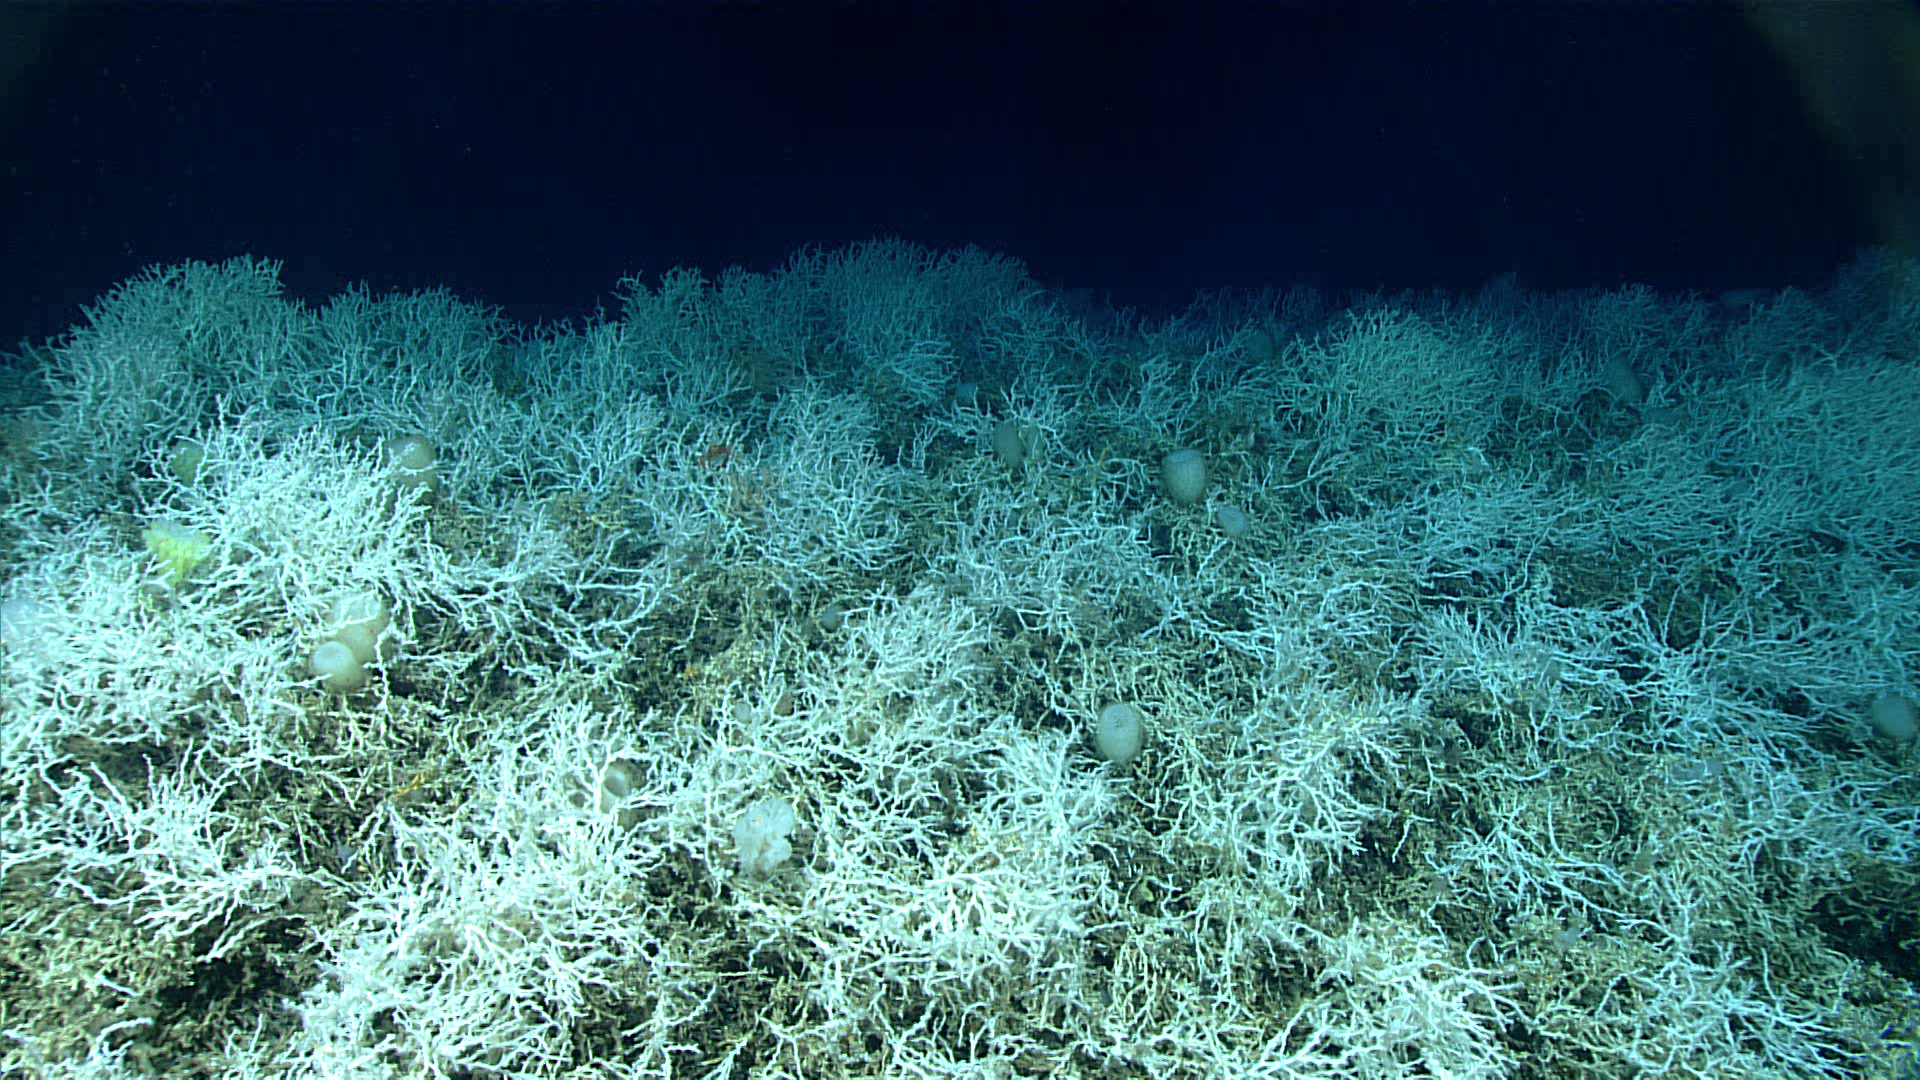 A large patch of white coral, looking like a pile of tumbleweeds, sit at the bottom of a dark ocean.